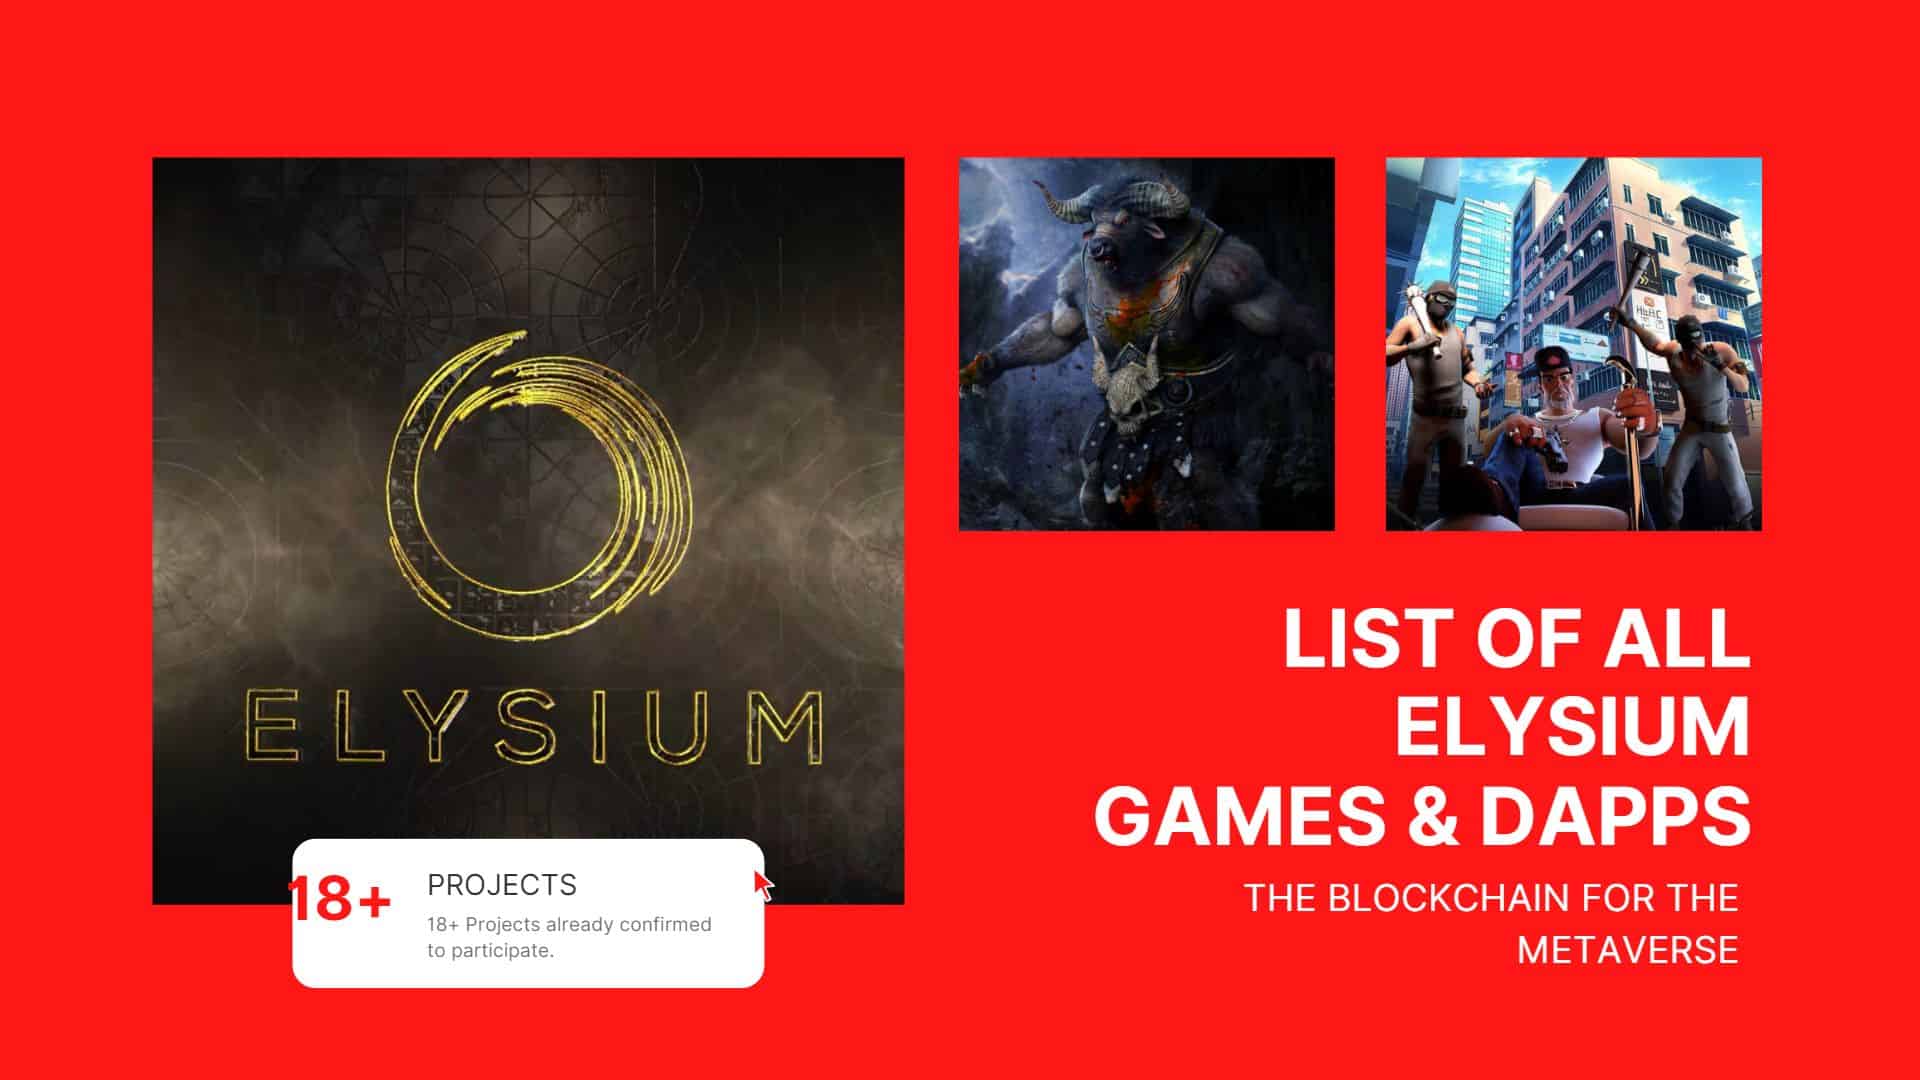 List of all the Elysium Blockchain Games and Dapps